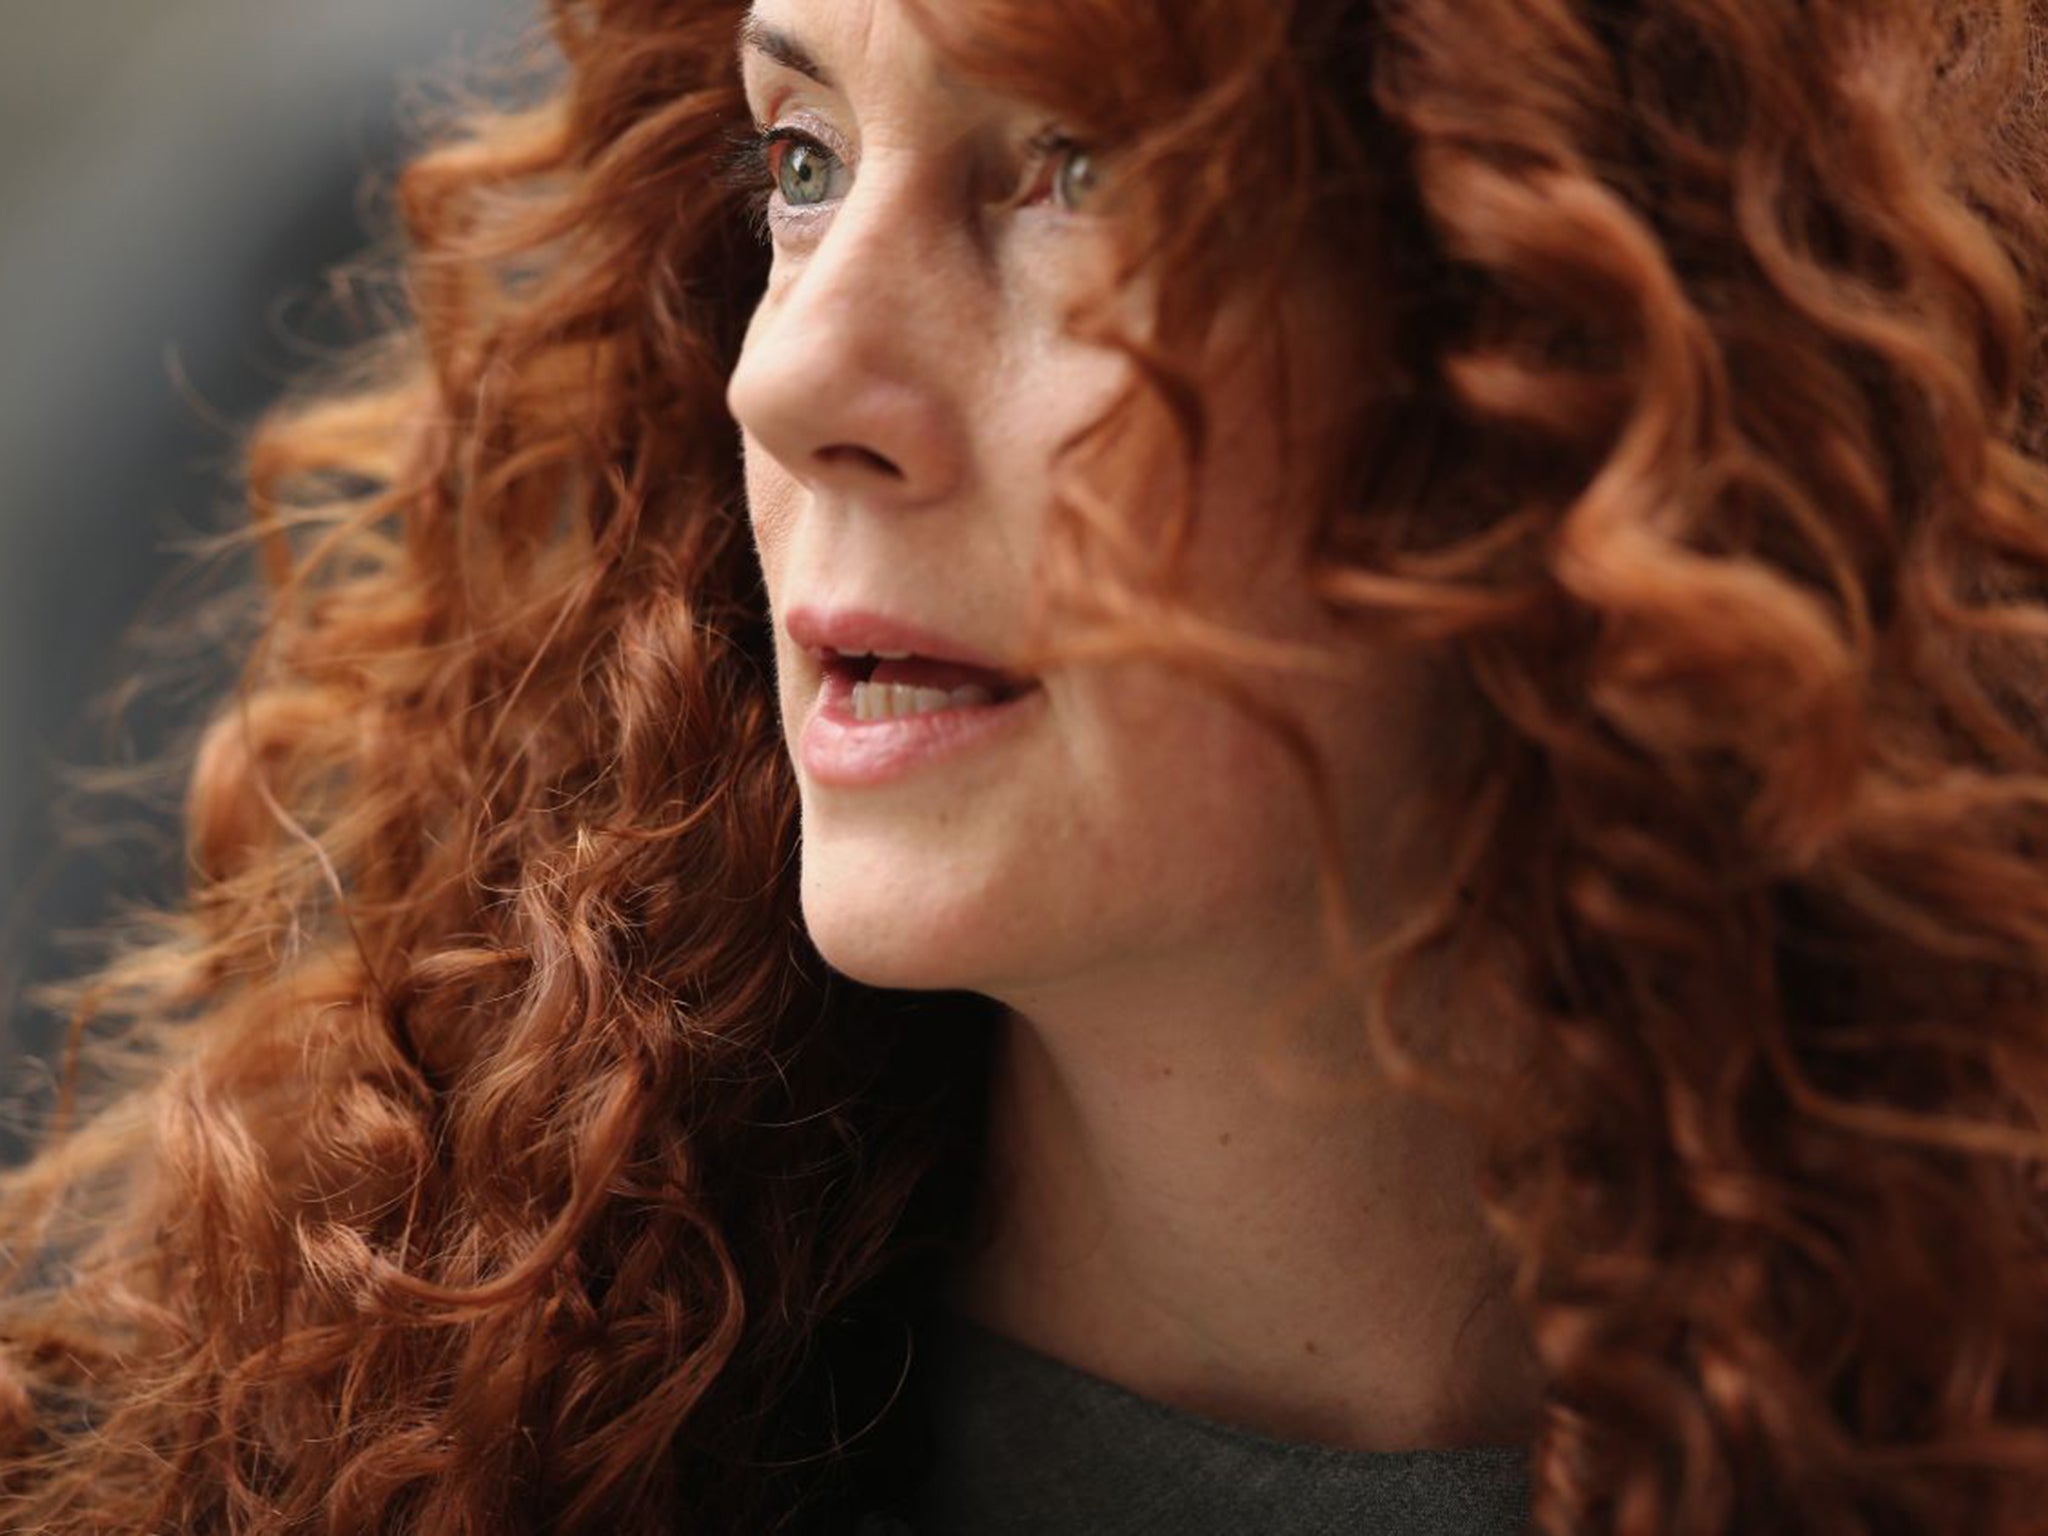 Rebekah Brooks is unlikely to have an easy ride on her return to British journalism